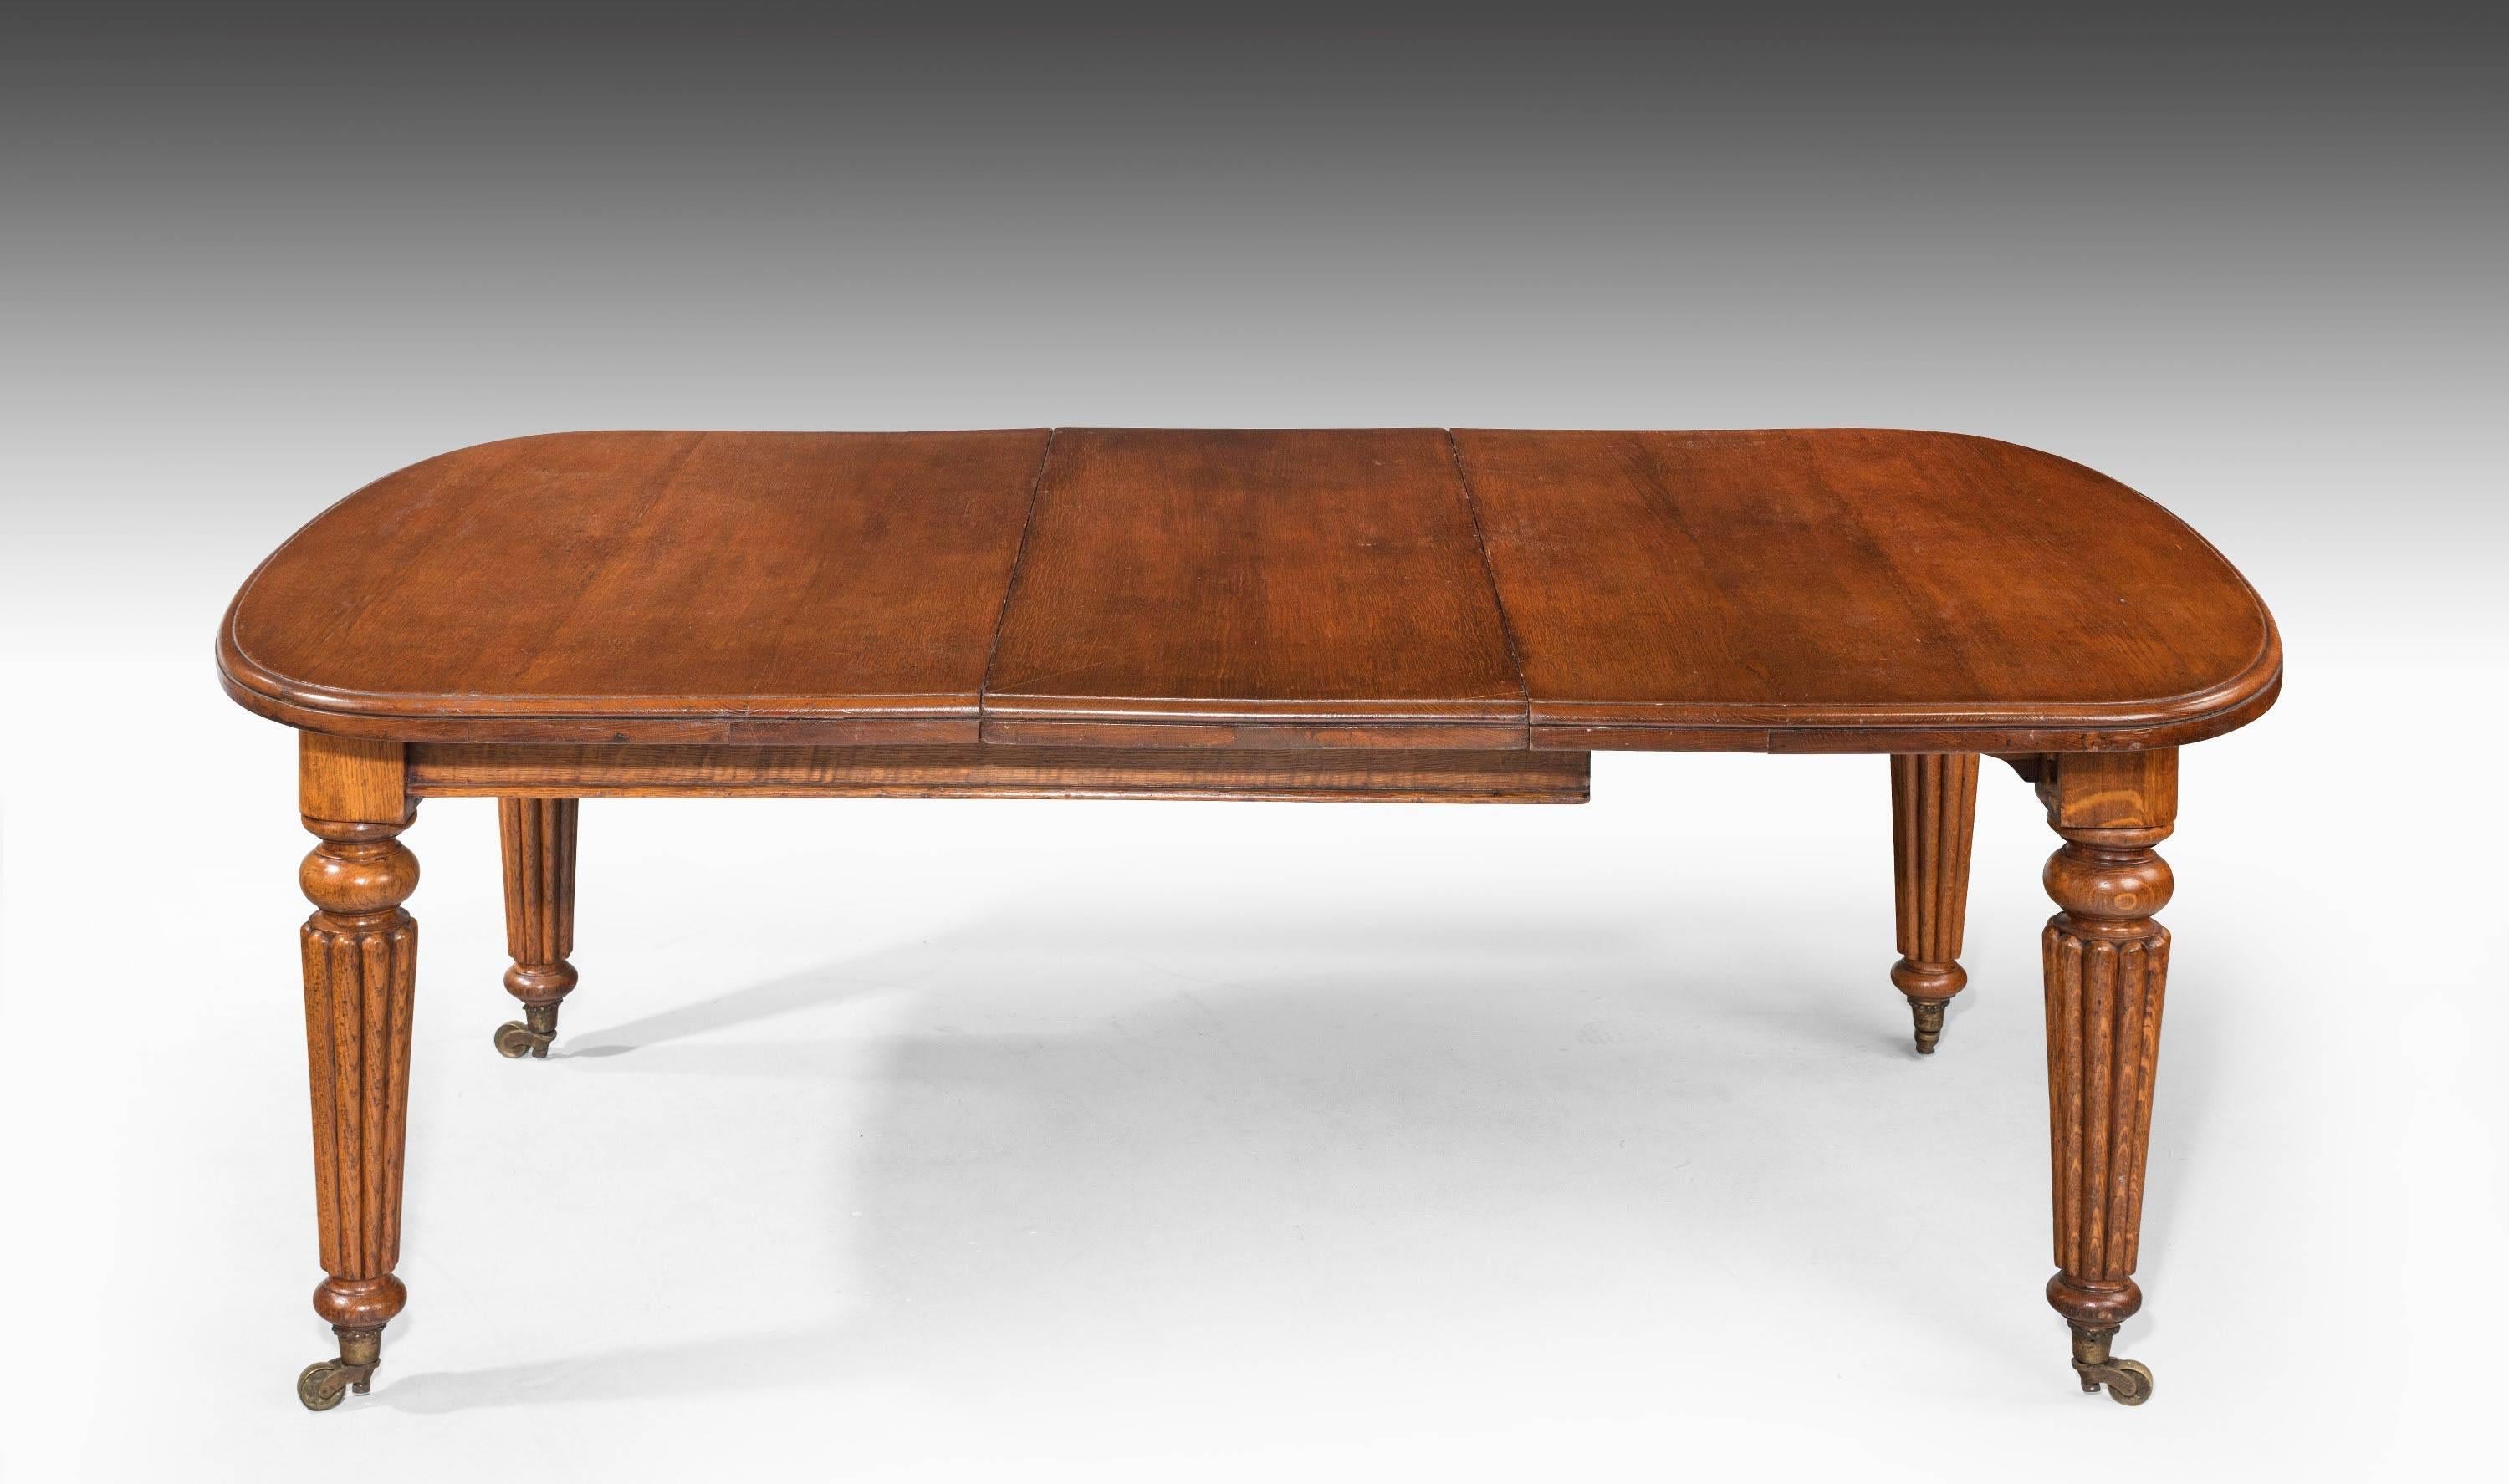 Late Regency Period Mahogany Extending Dining Table with Reeded Decoration 1